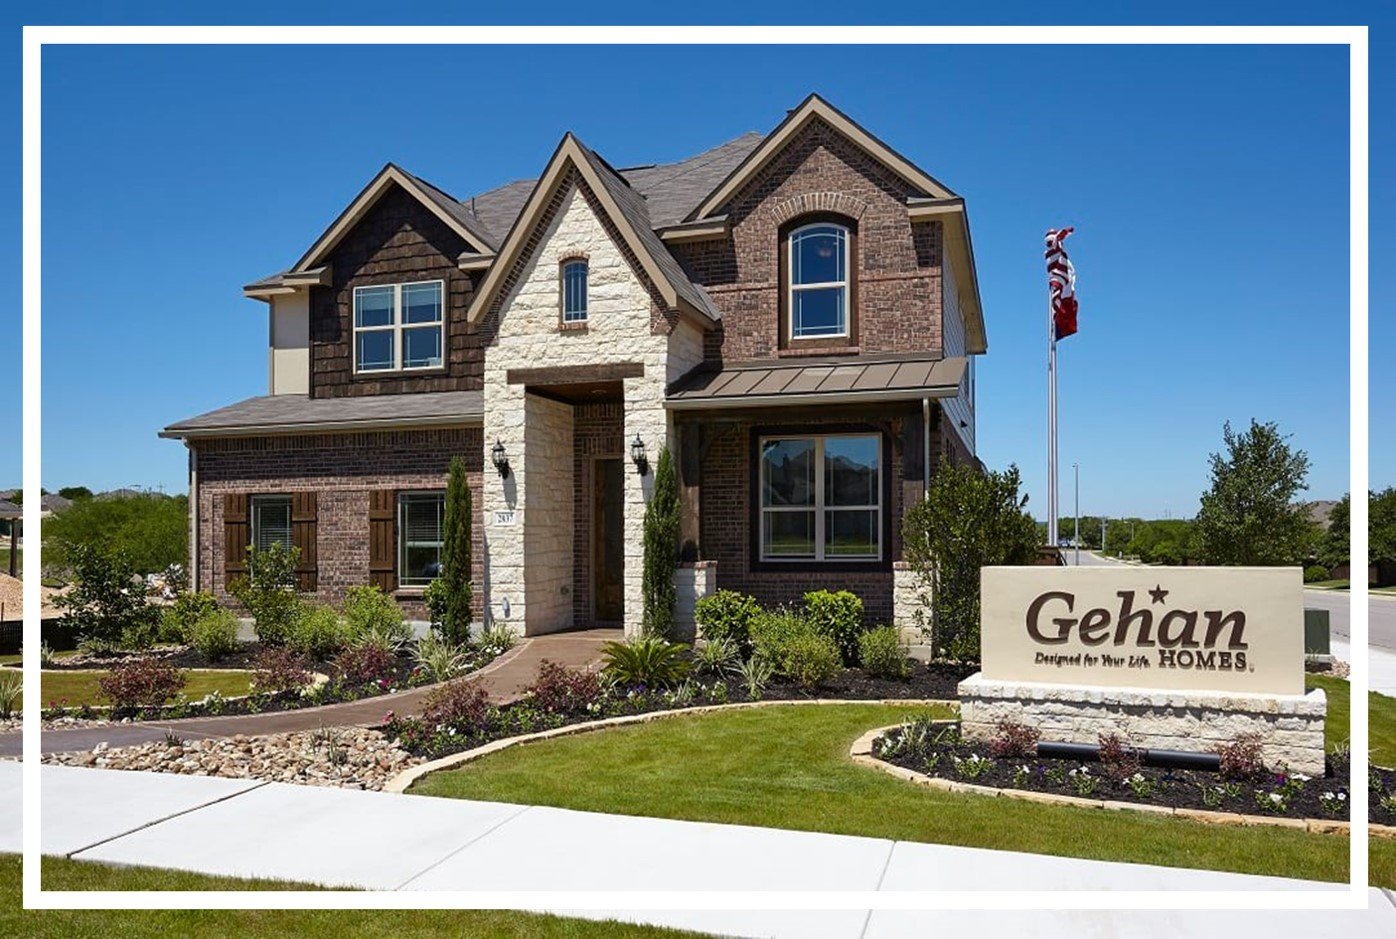 Press Release | Gehan Homes Selects Clare As Their Smart Home & Security Partner